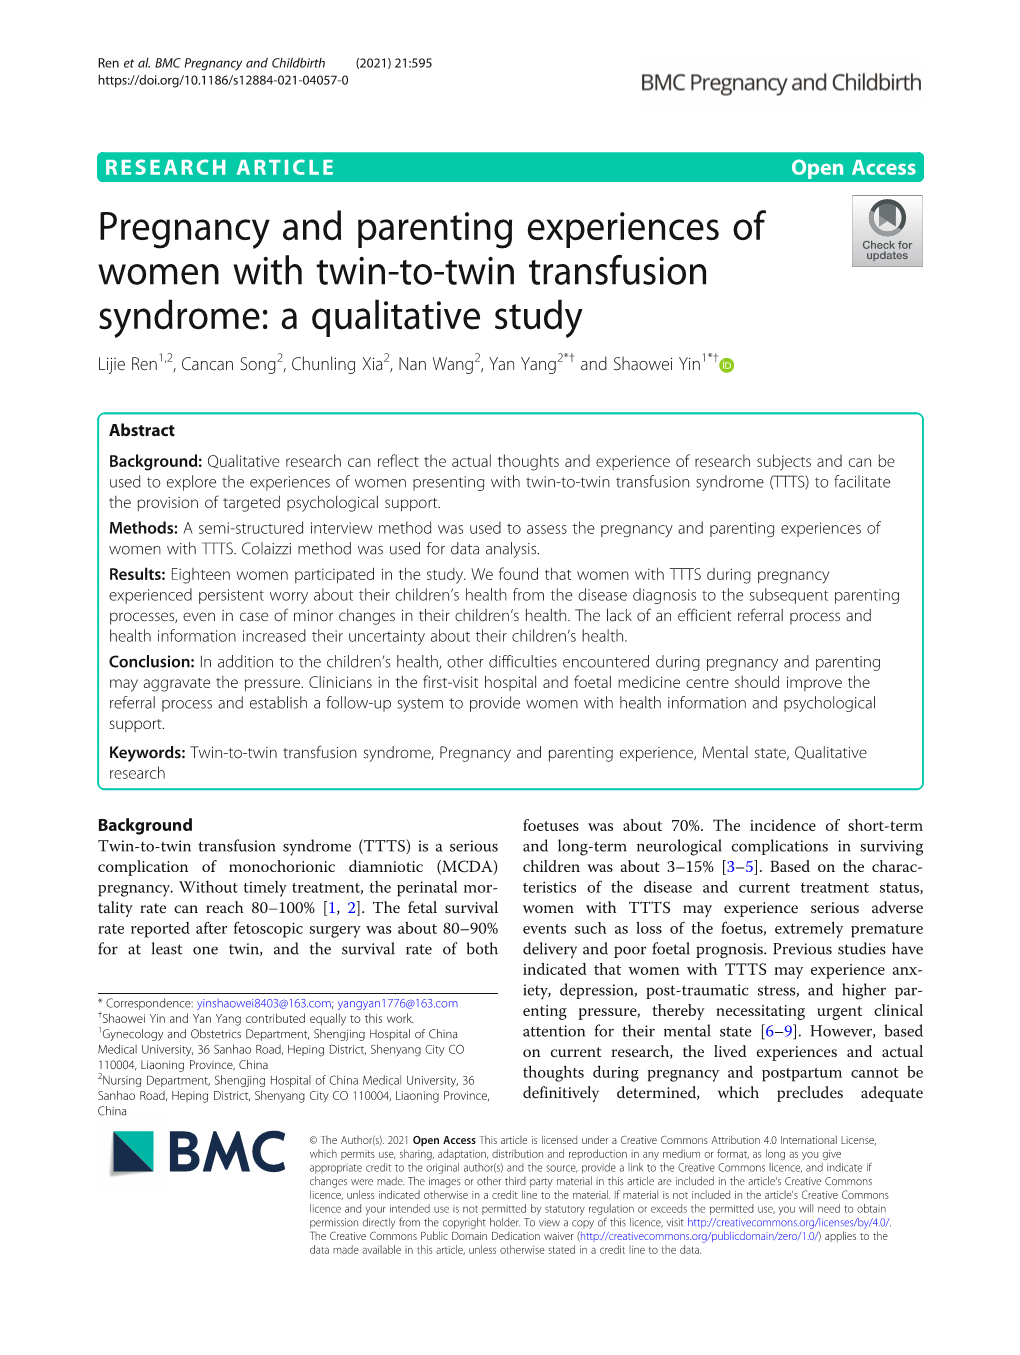 Pregnancy and Parenting Experiences of Women with Twin-To-Twin Transfusion Syndrome: a Qualitative Study